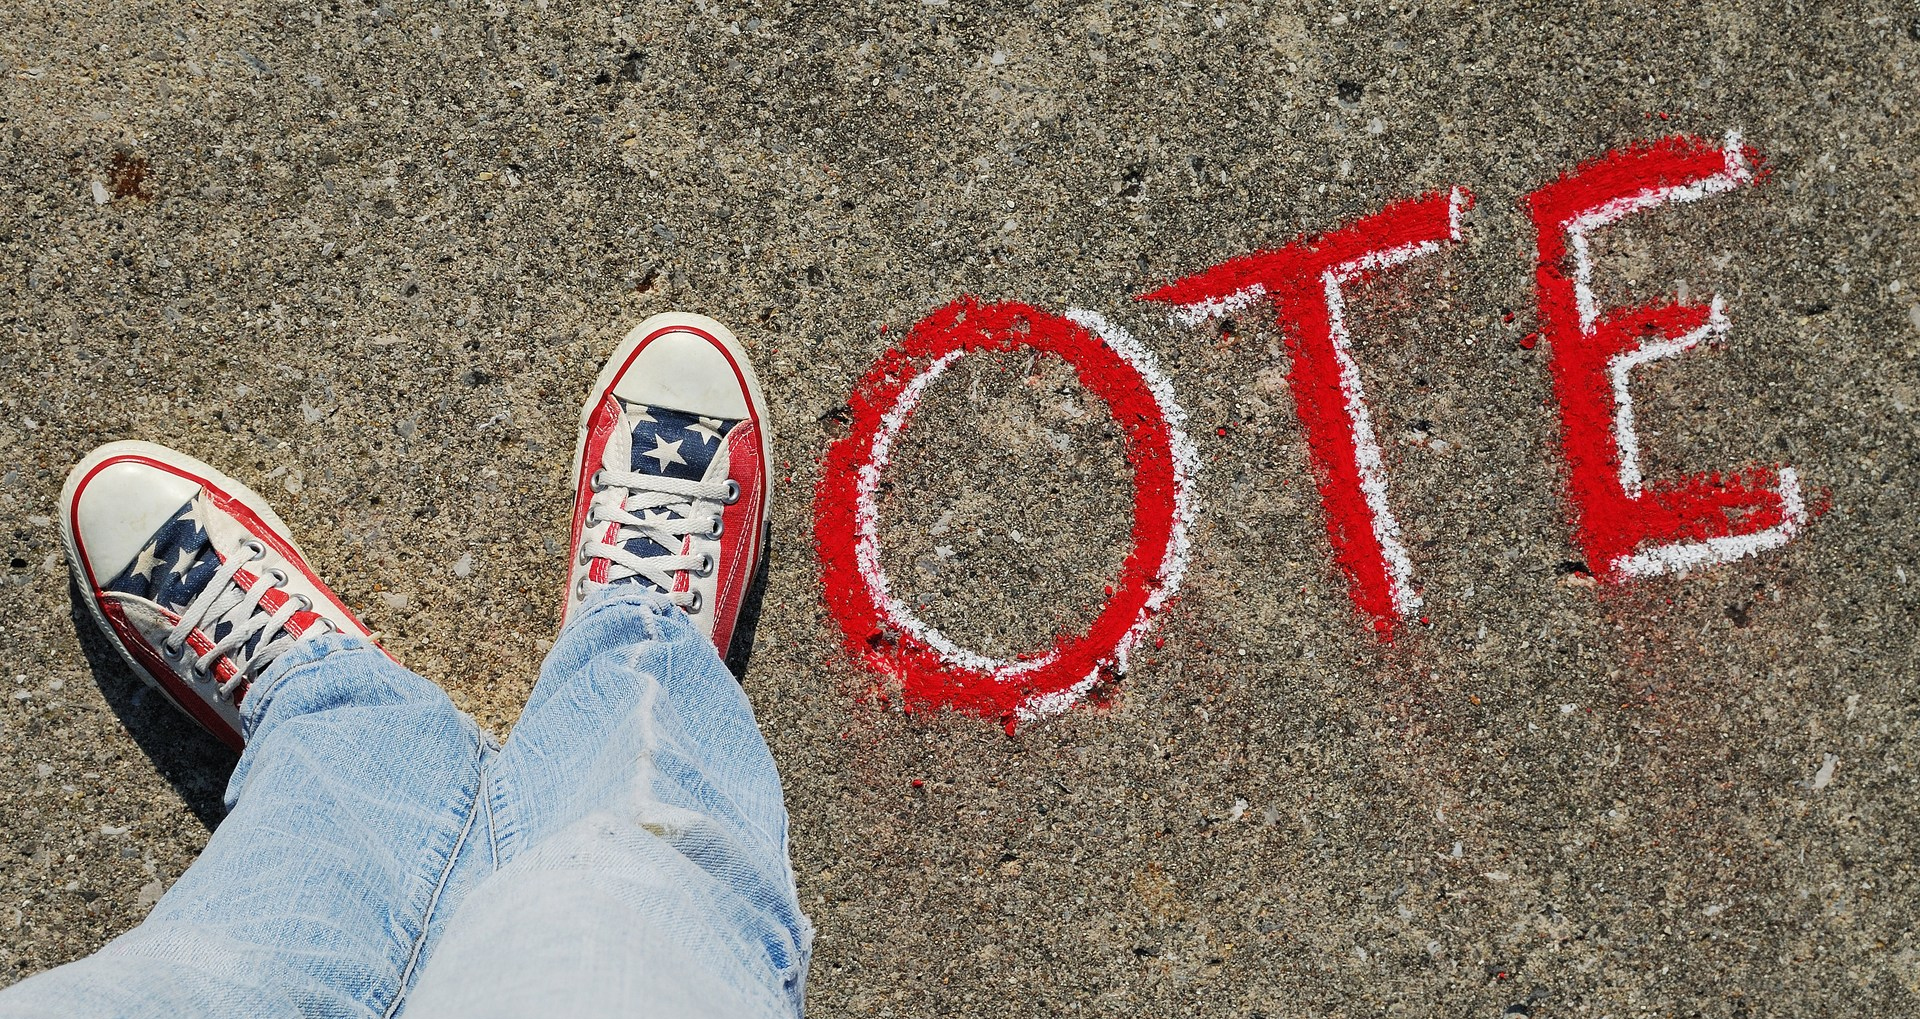 Keep America Great: 10 Reasons You Must Vote, Despite What The Polls Are Showing